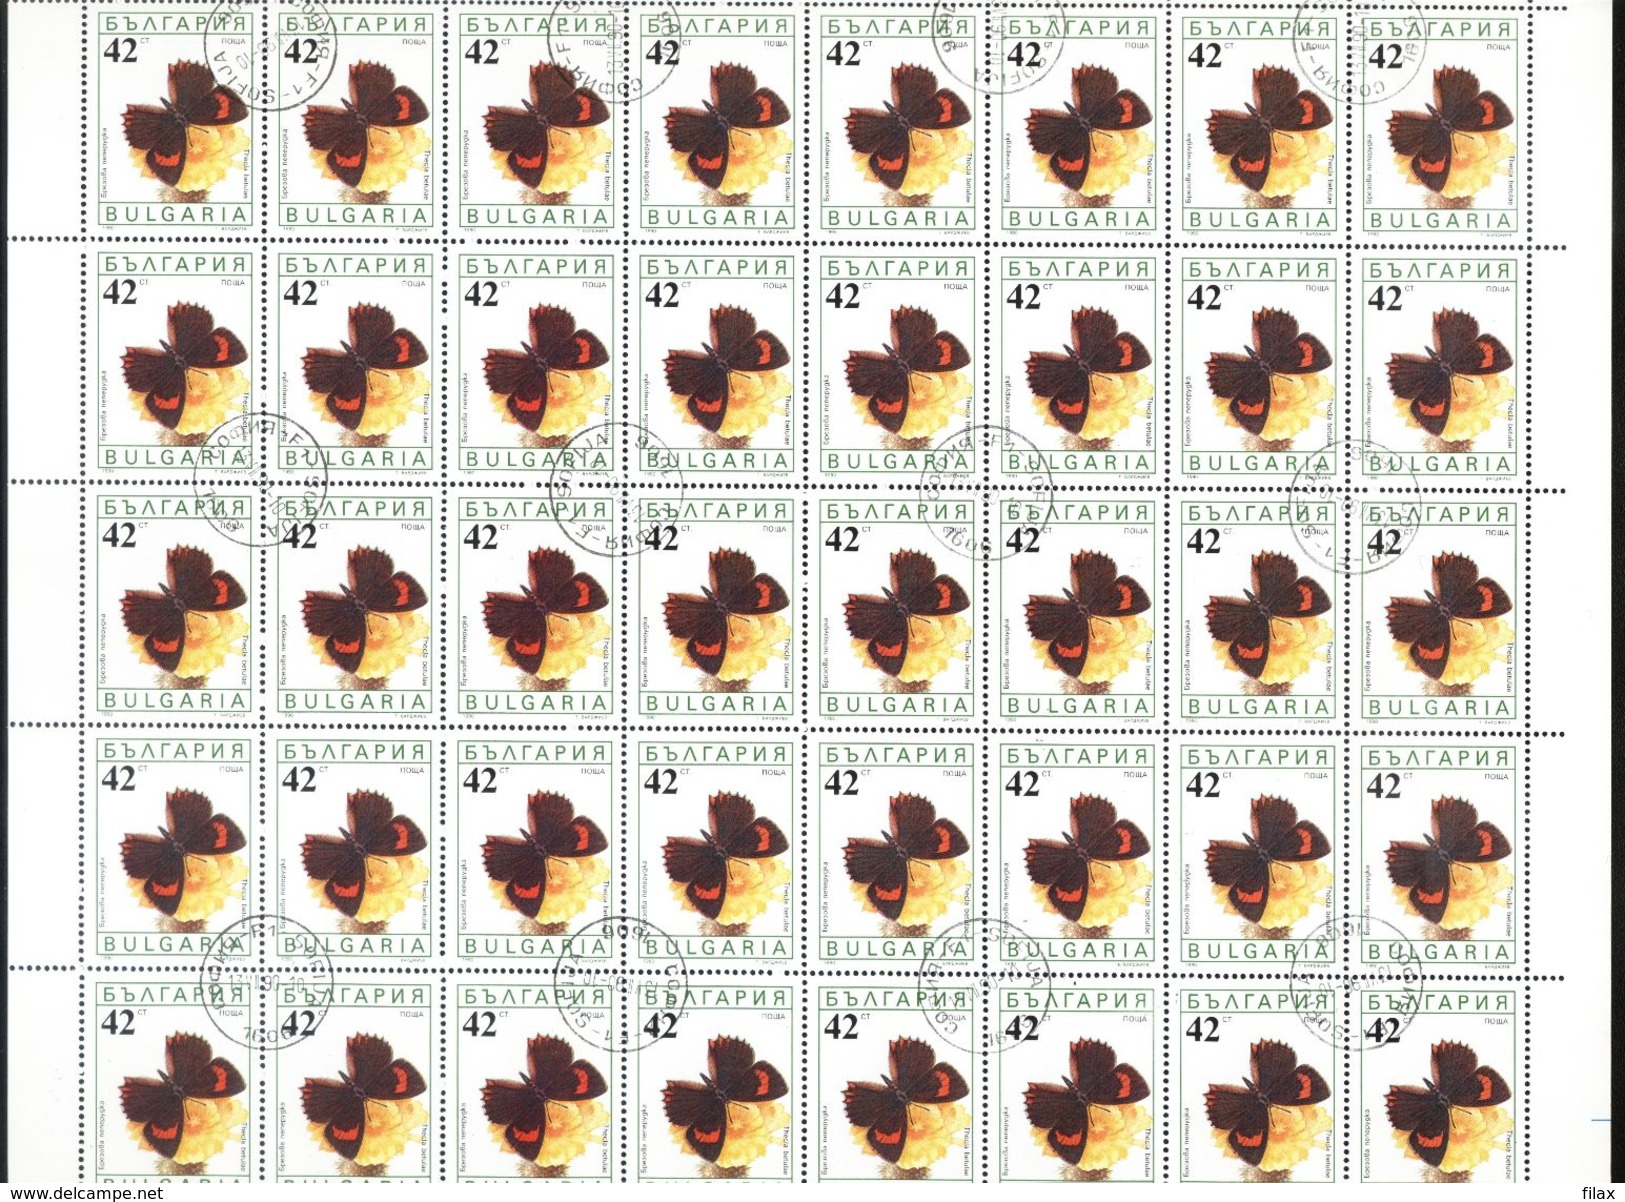 LOT BGCTO07 - CHEAP CTO STAMPS IN SHEETS (for packets or resale)